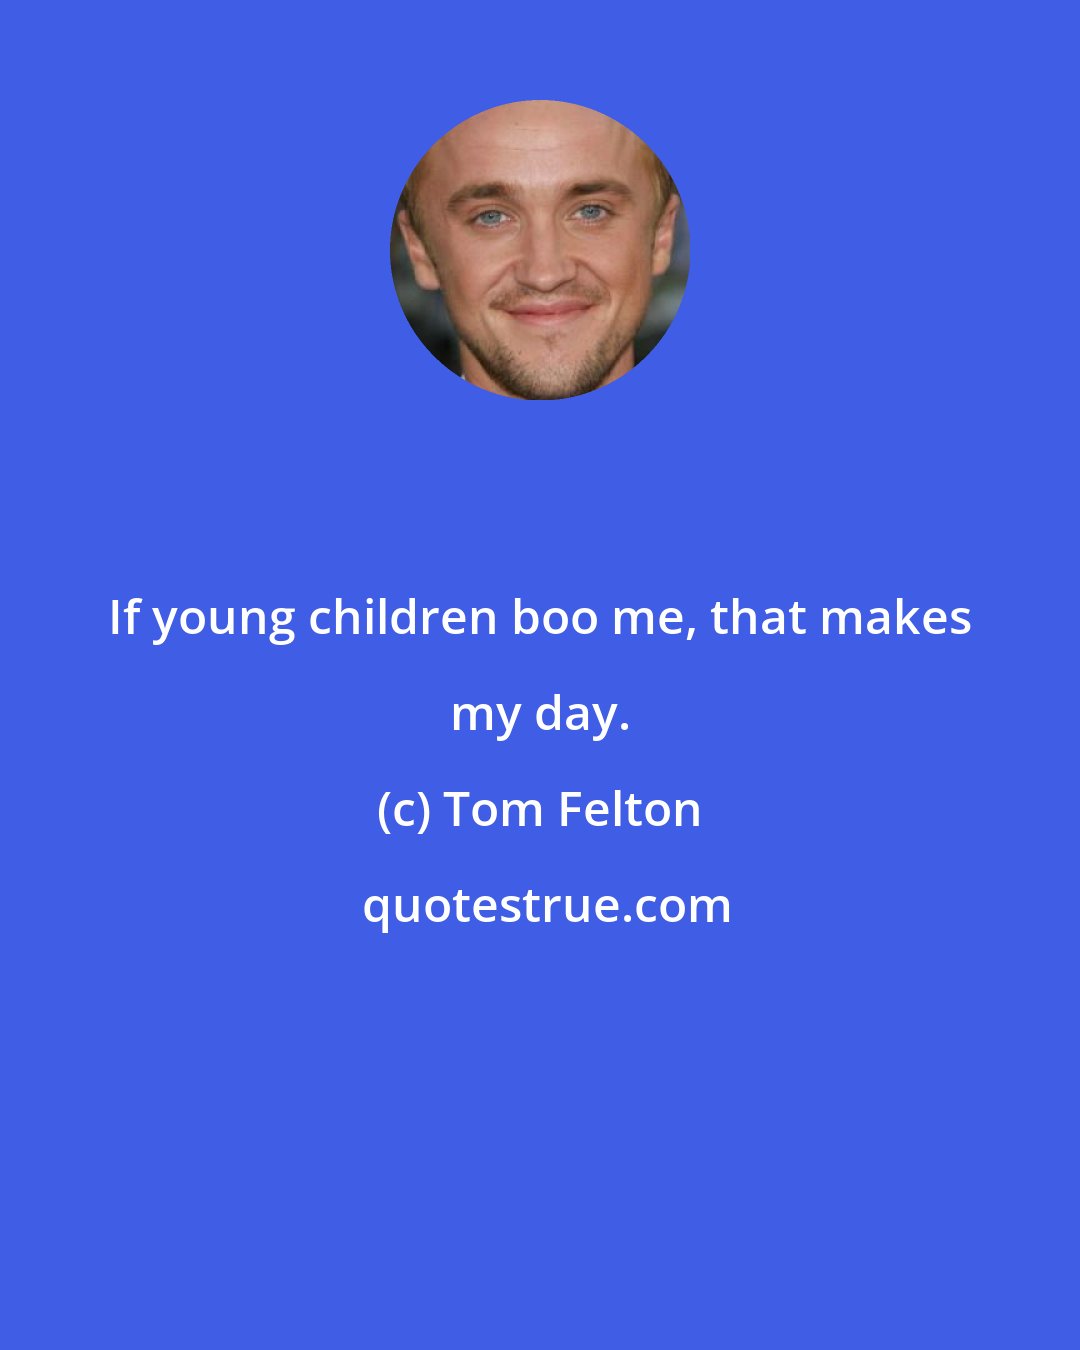 Tom Felton: If young children boo me, that makes my day.